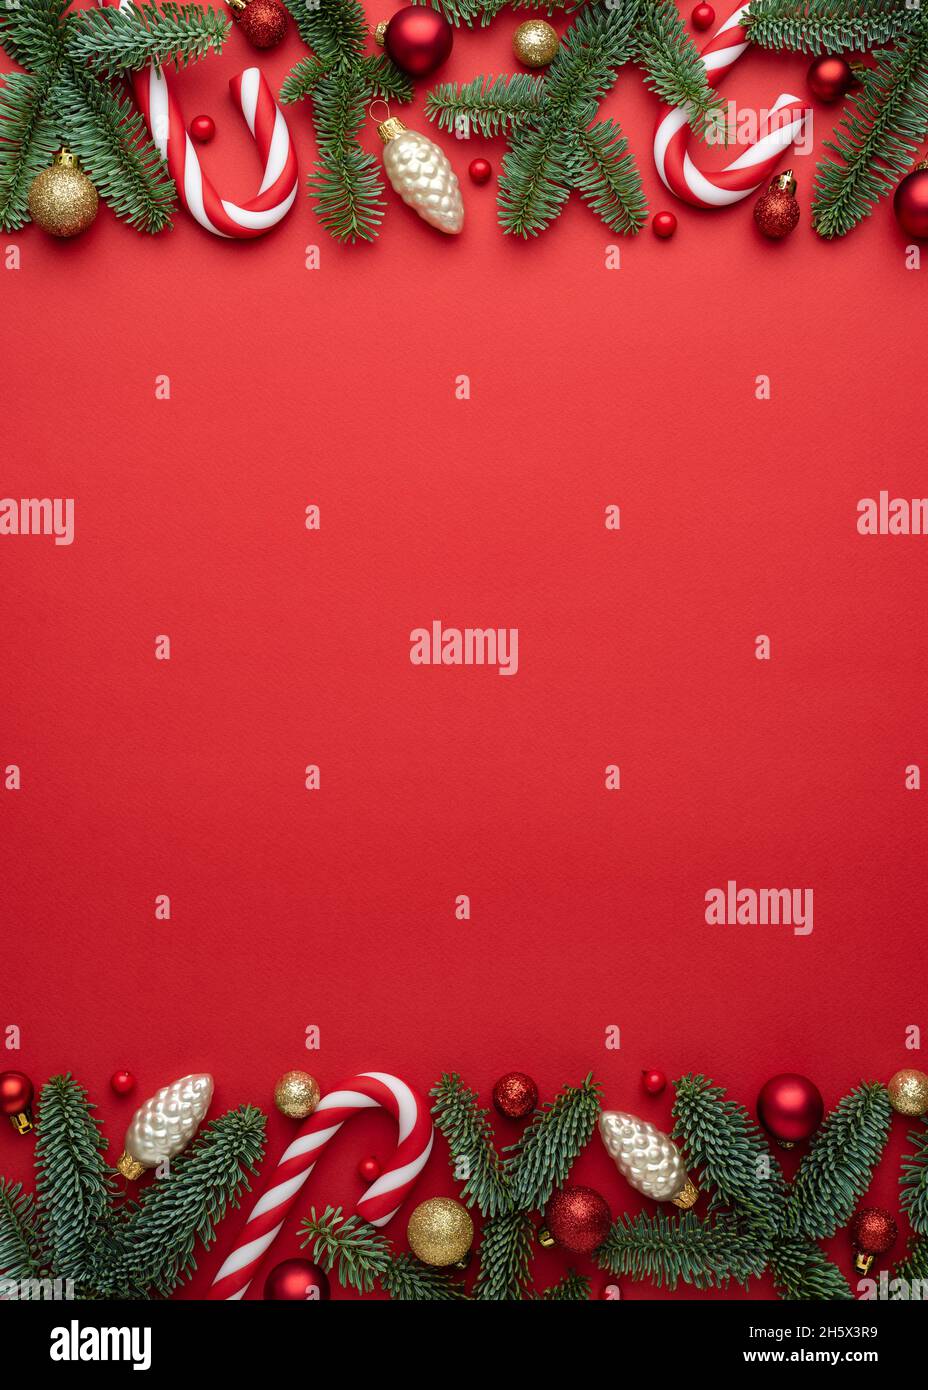 Red background with Christmas decorations made of fir branches and Christmas balls. Blank with copy space for text Stock Photo